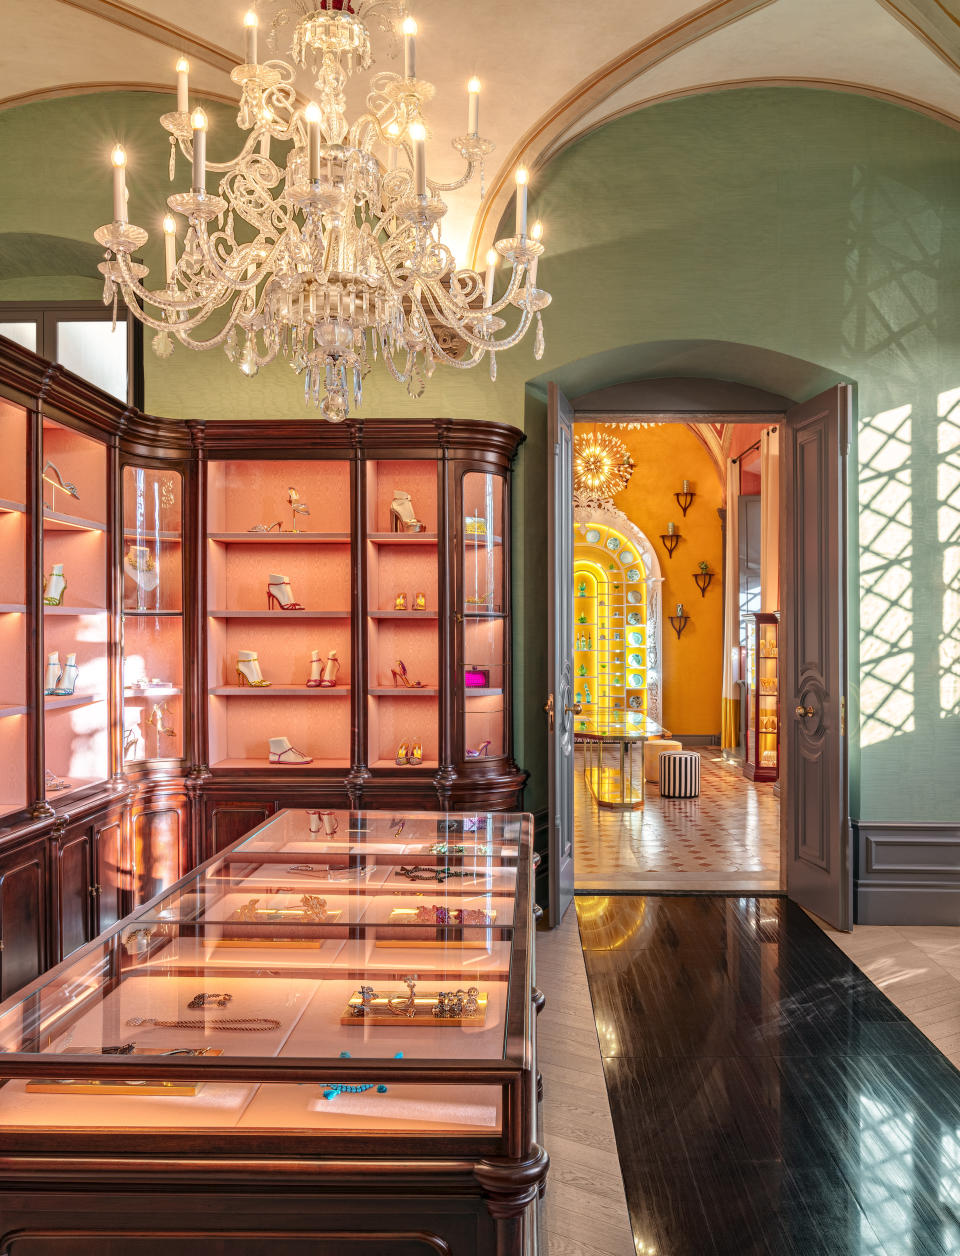 Inside the Aquazzura store in Florence.